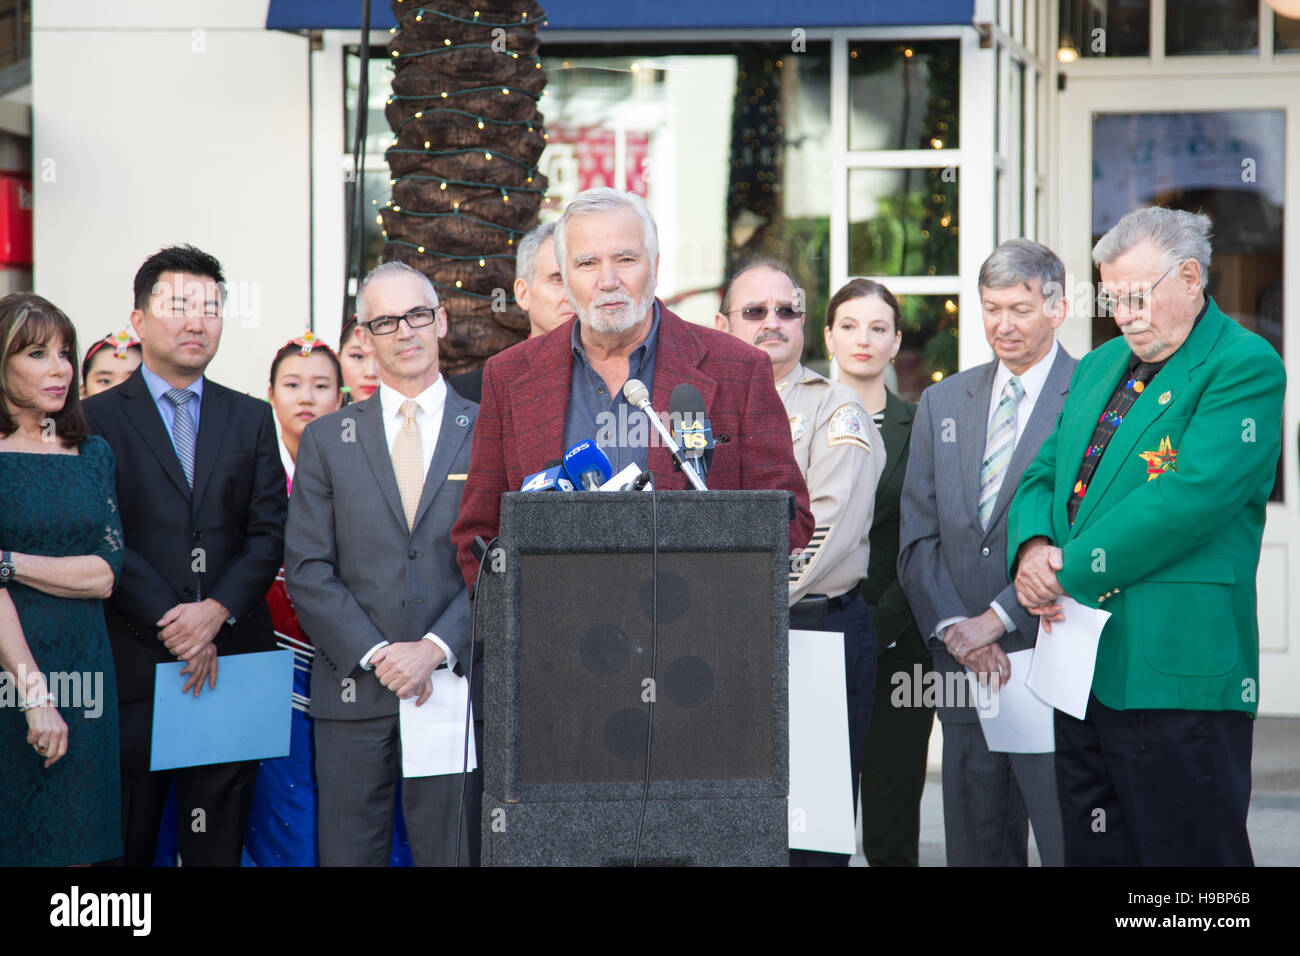 Hollywood, California, USA. 21st November, 2016. Actor John McCook speaks at the press conference for the 85th Annual Hollywood Christmas Parade held at the Hollywood & Highland Center in Hollywood, California, USA.  Credit:  Sheri Determan / Alamy Live News Stock Photo